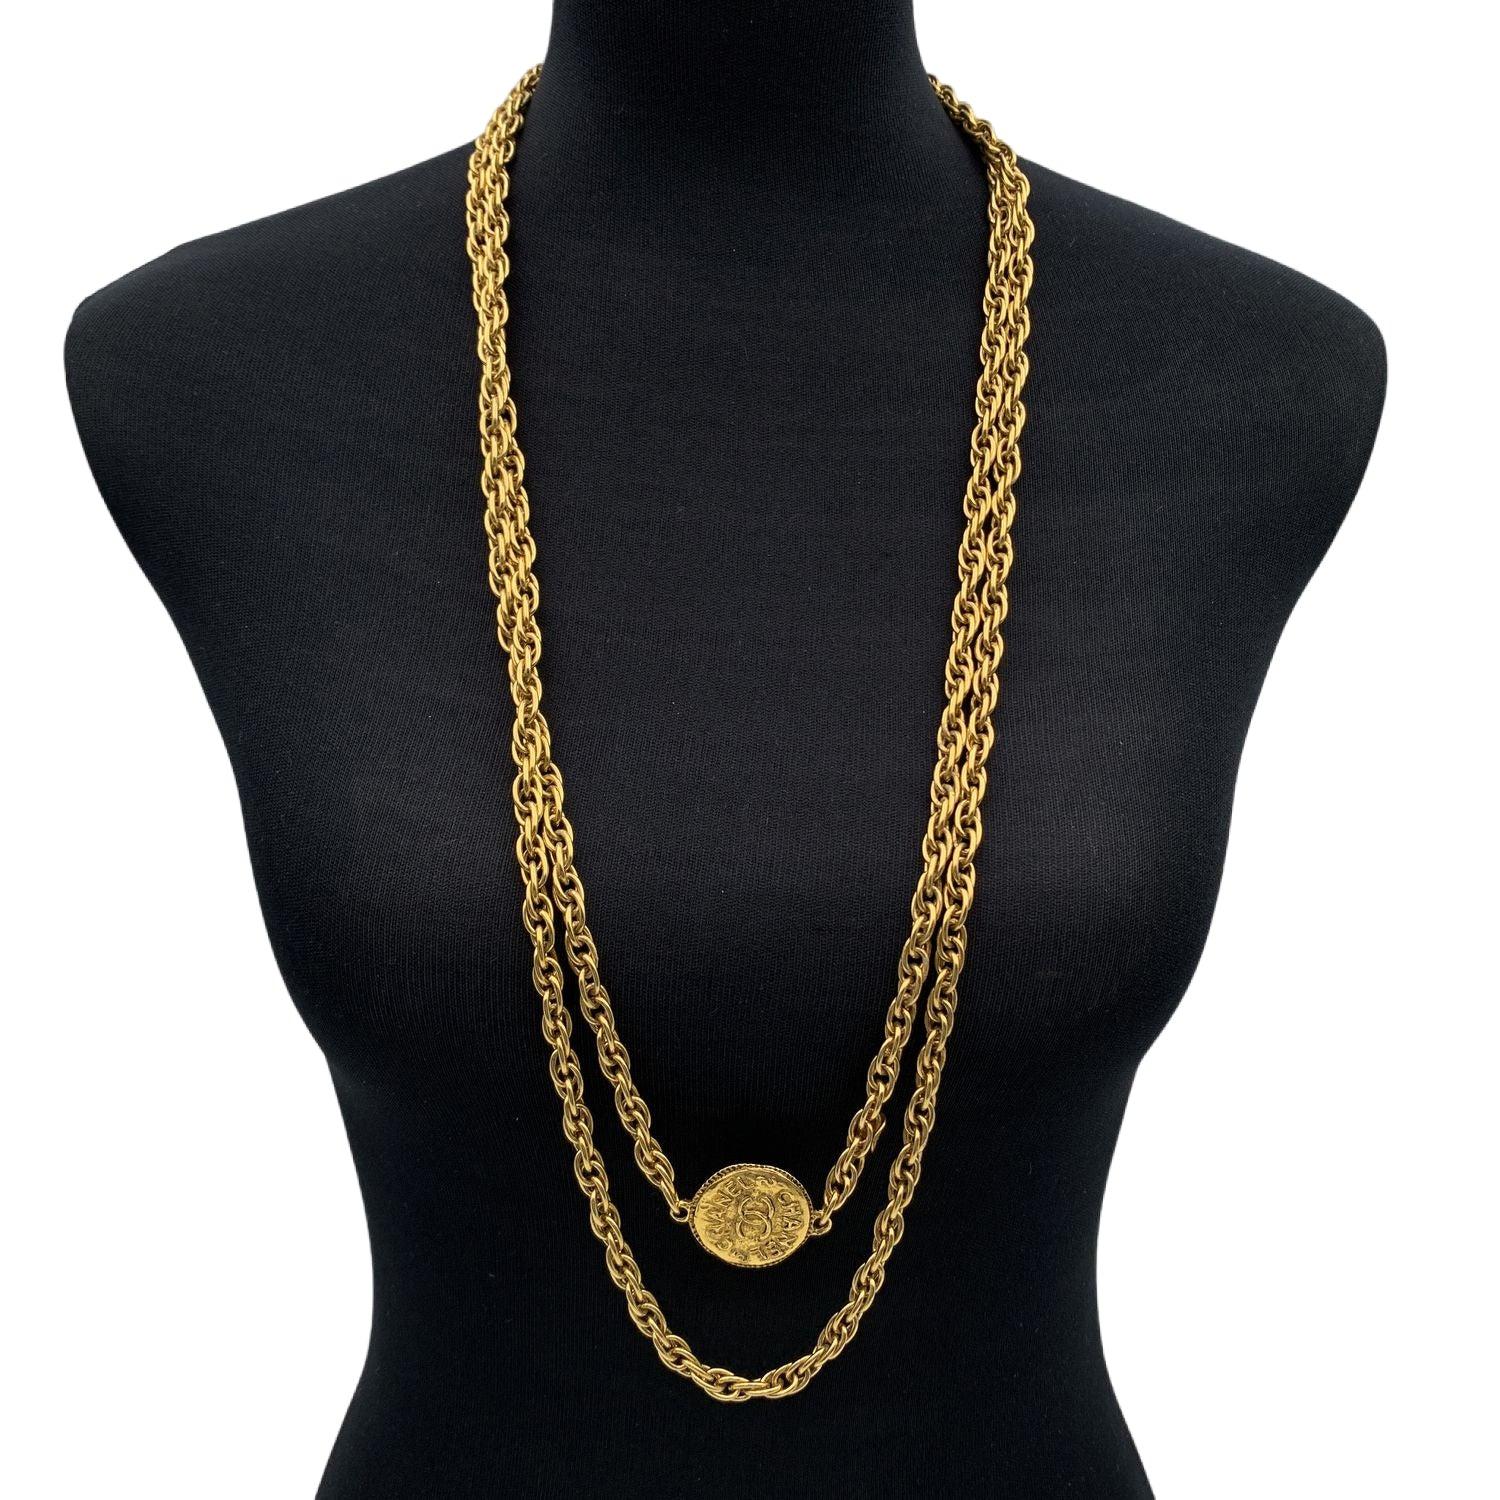 Vintage gold metal chain and round Chanel - CC logo necklace by CHANEL. No closure. It can be worn one or two turns. Necklace's drop 35 inches - 88.8 cm. 'CHANEL - Made in France' round tab on the chain. Condition A - EXCELLENT Gently used. Please,